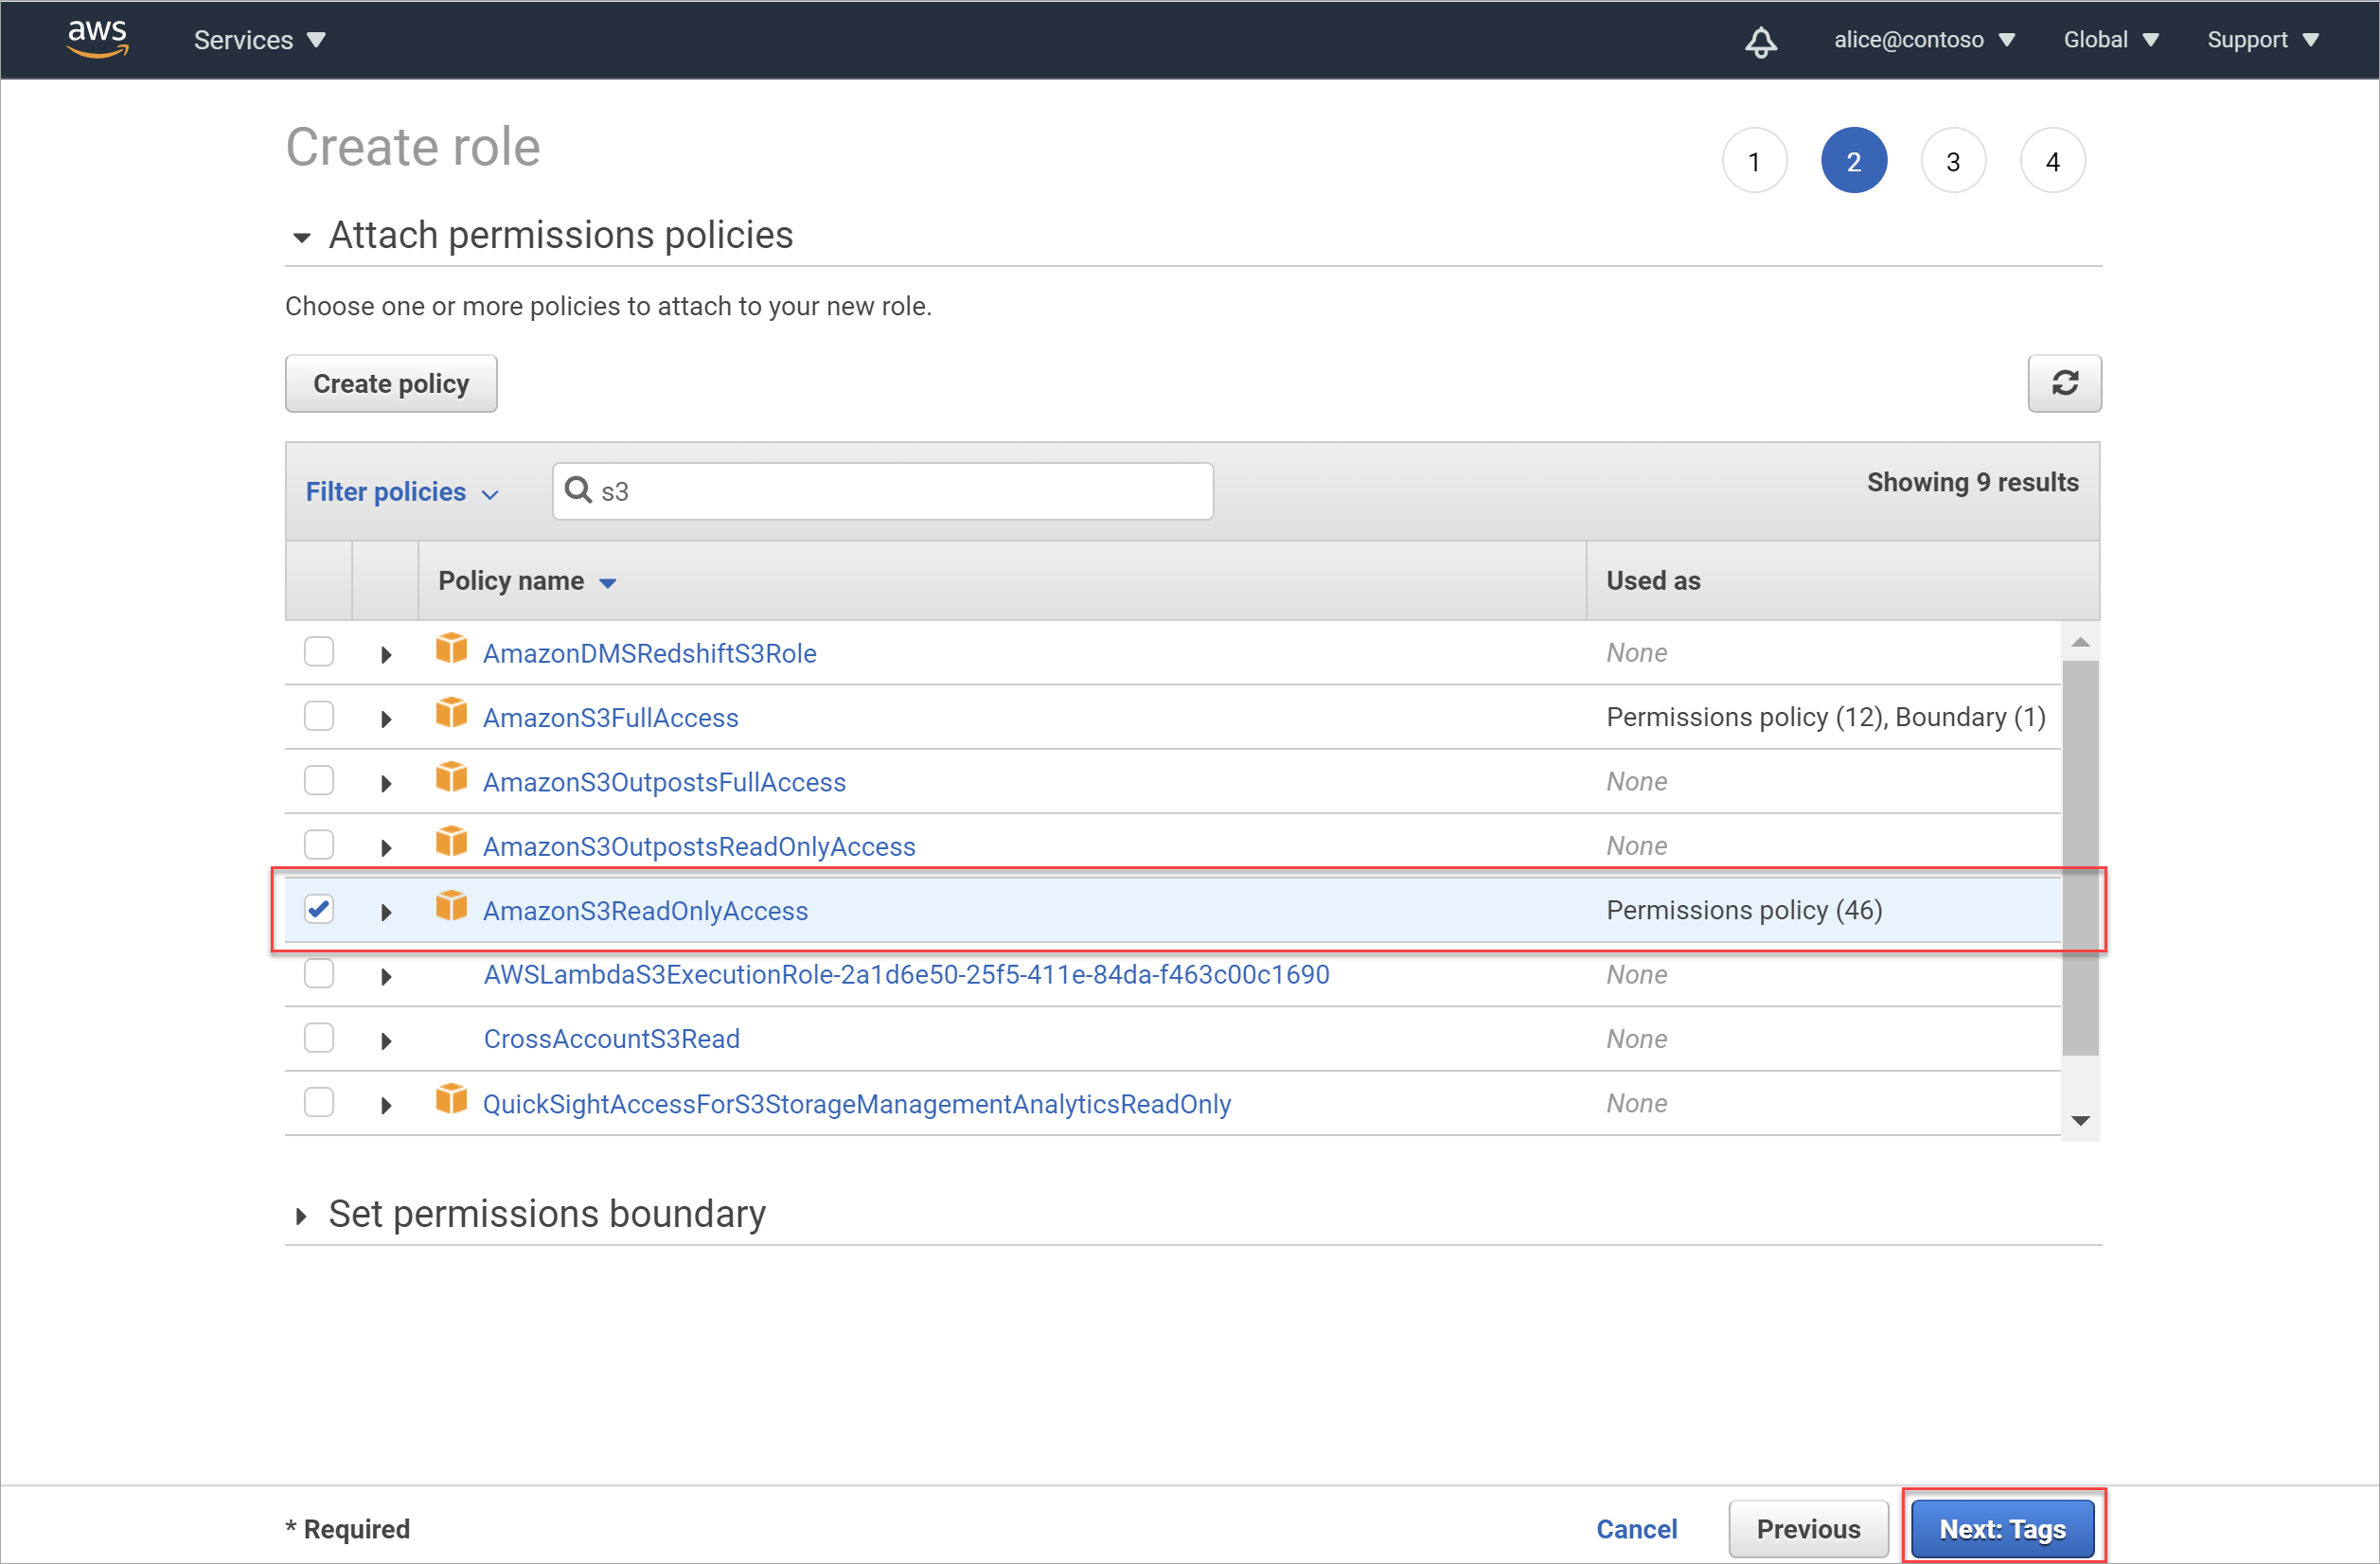 Select the ReadOnlyAccess policy for the new Amazon S3 scanning role.